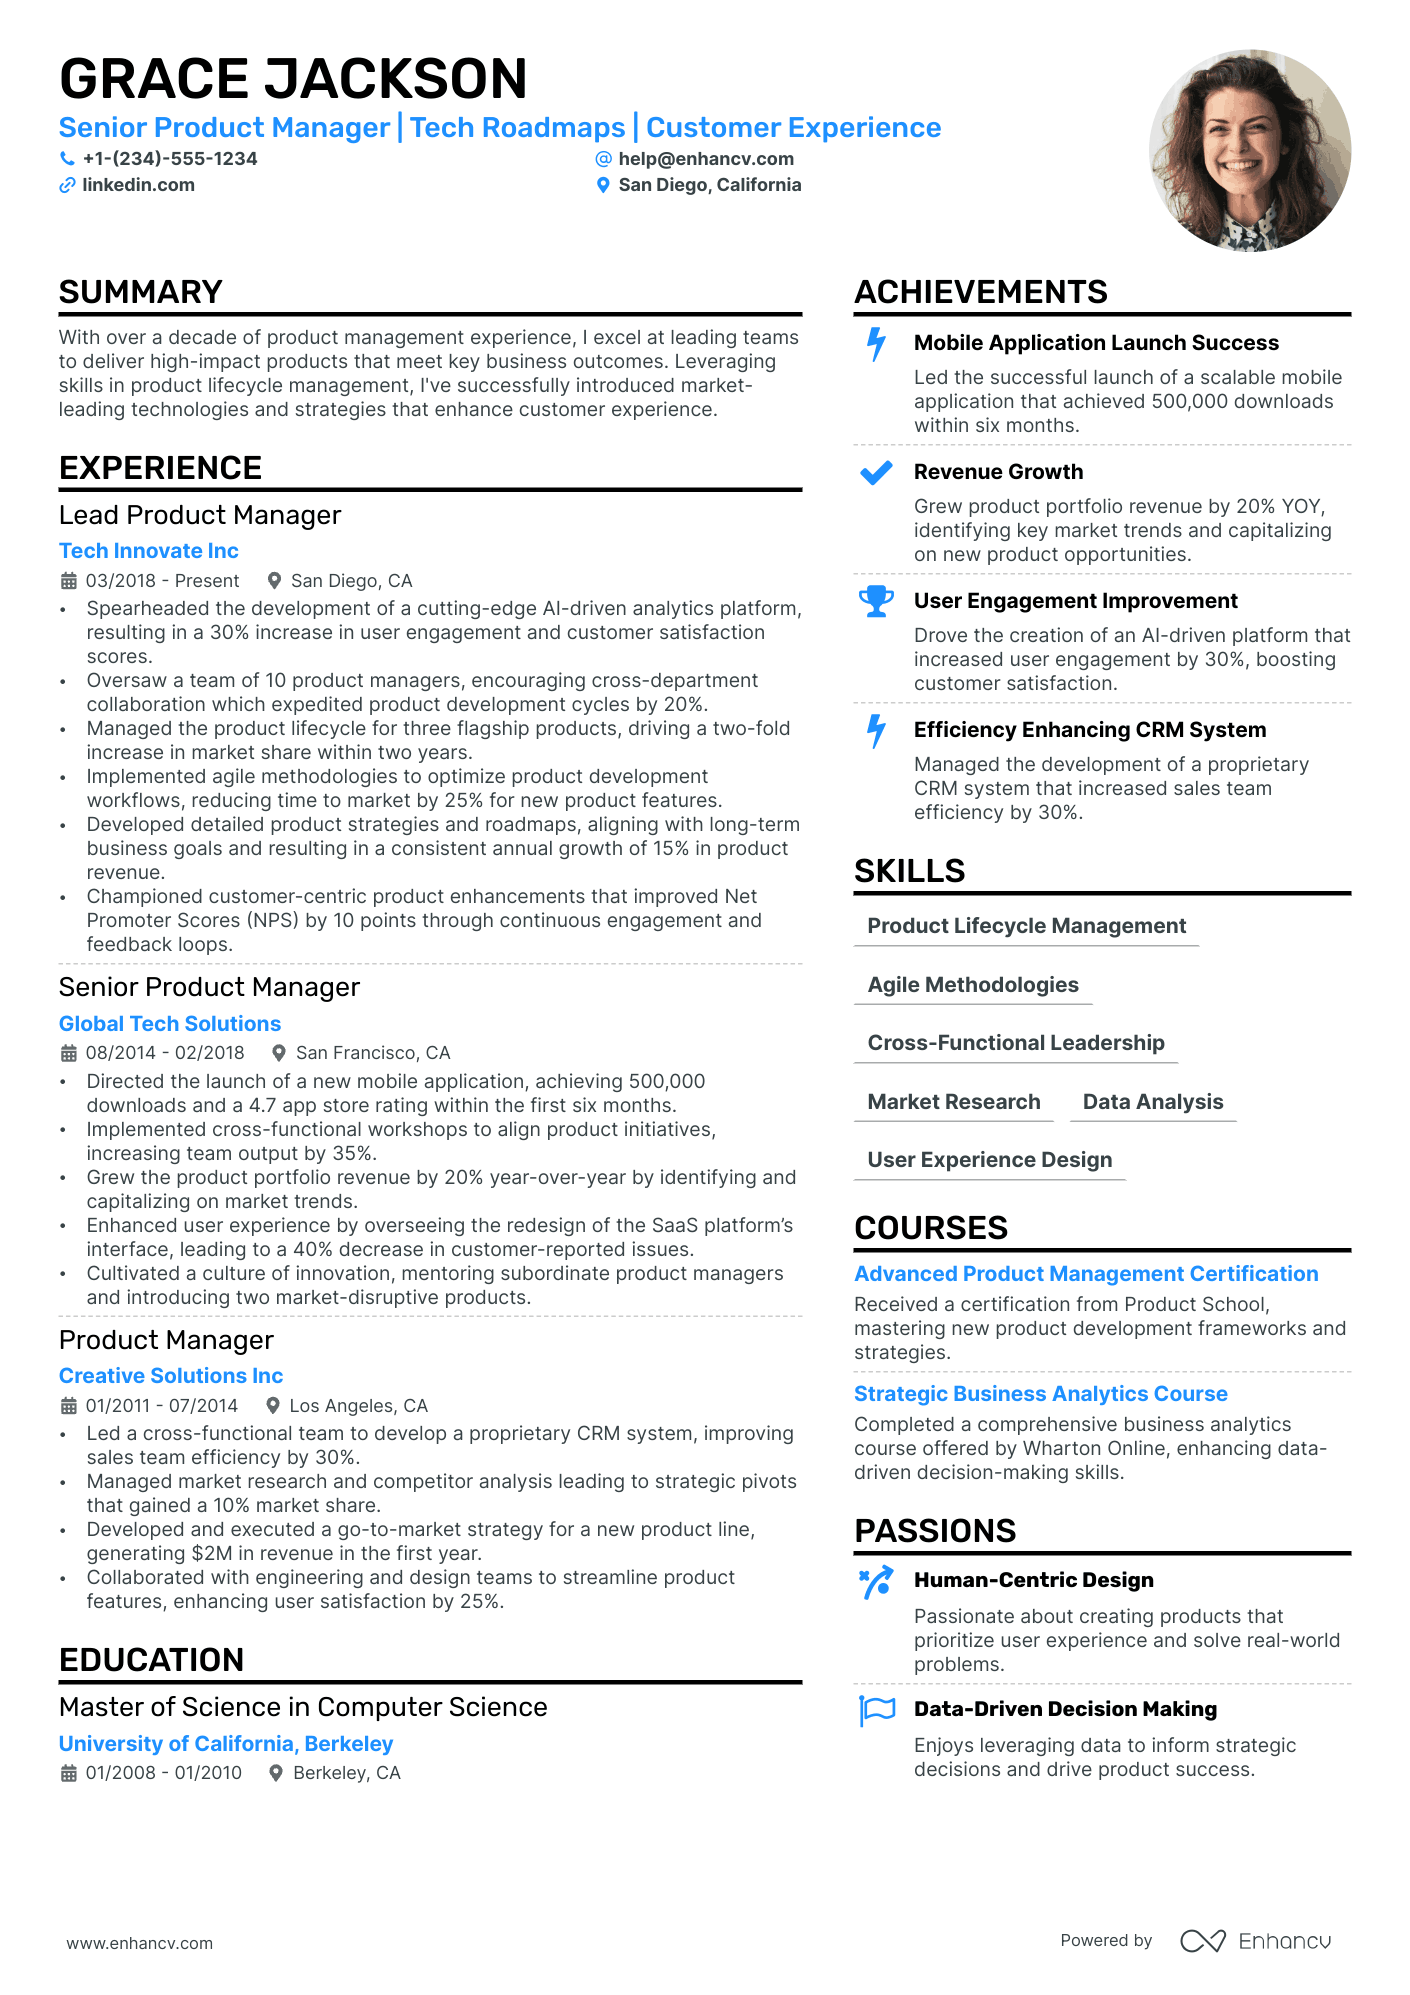 Group Product Manager resume example